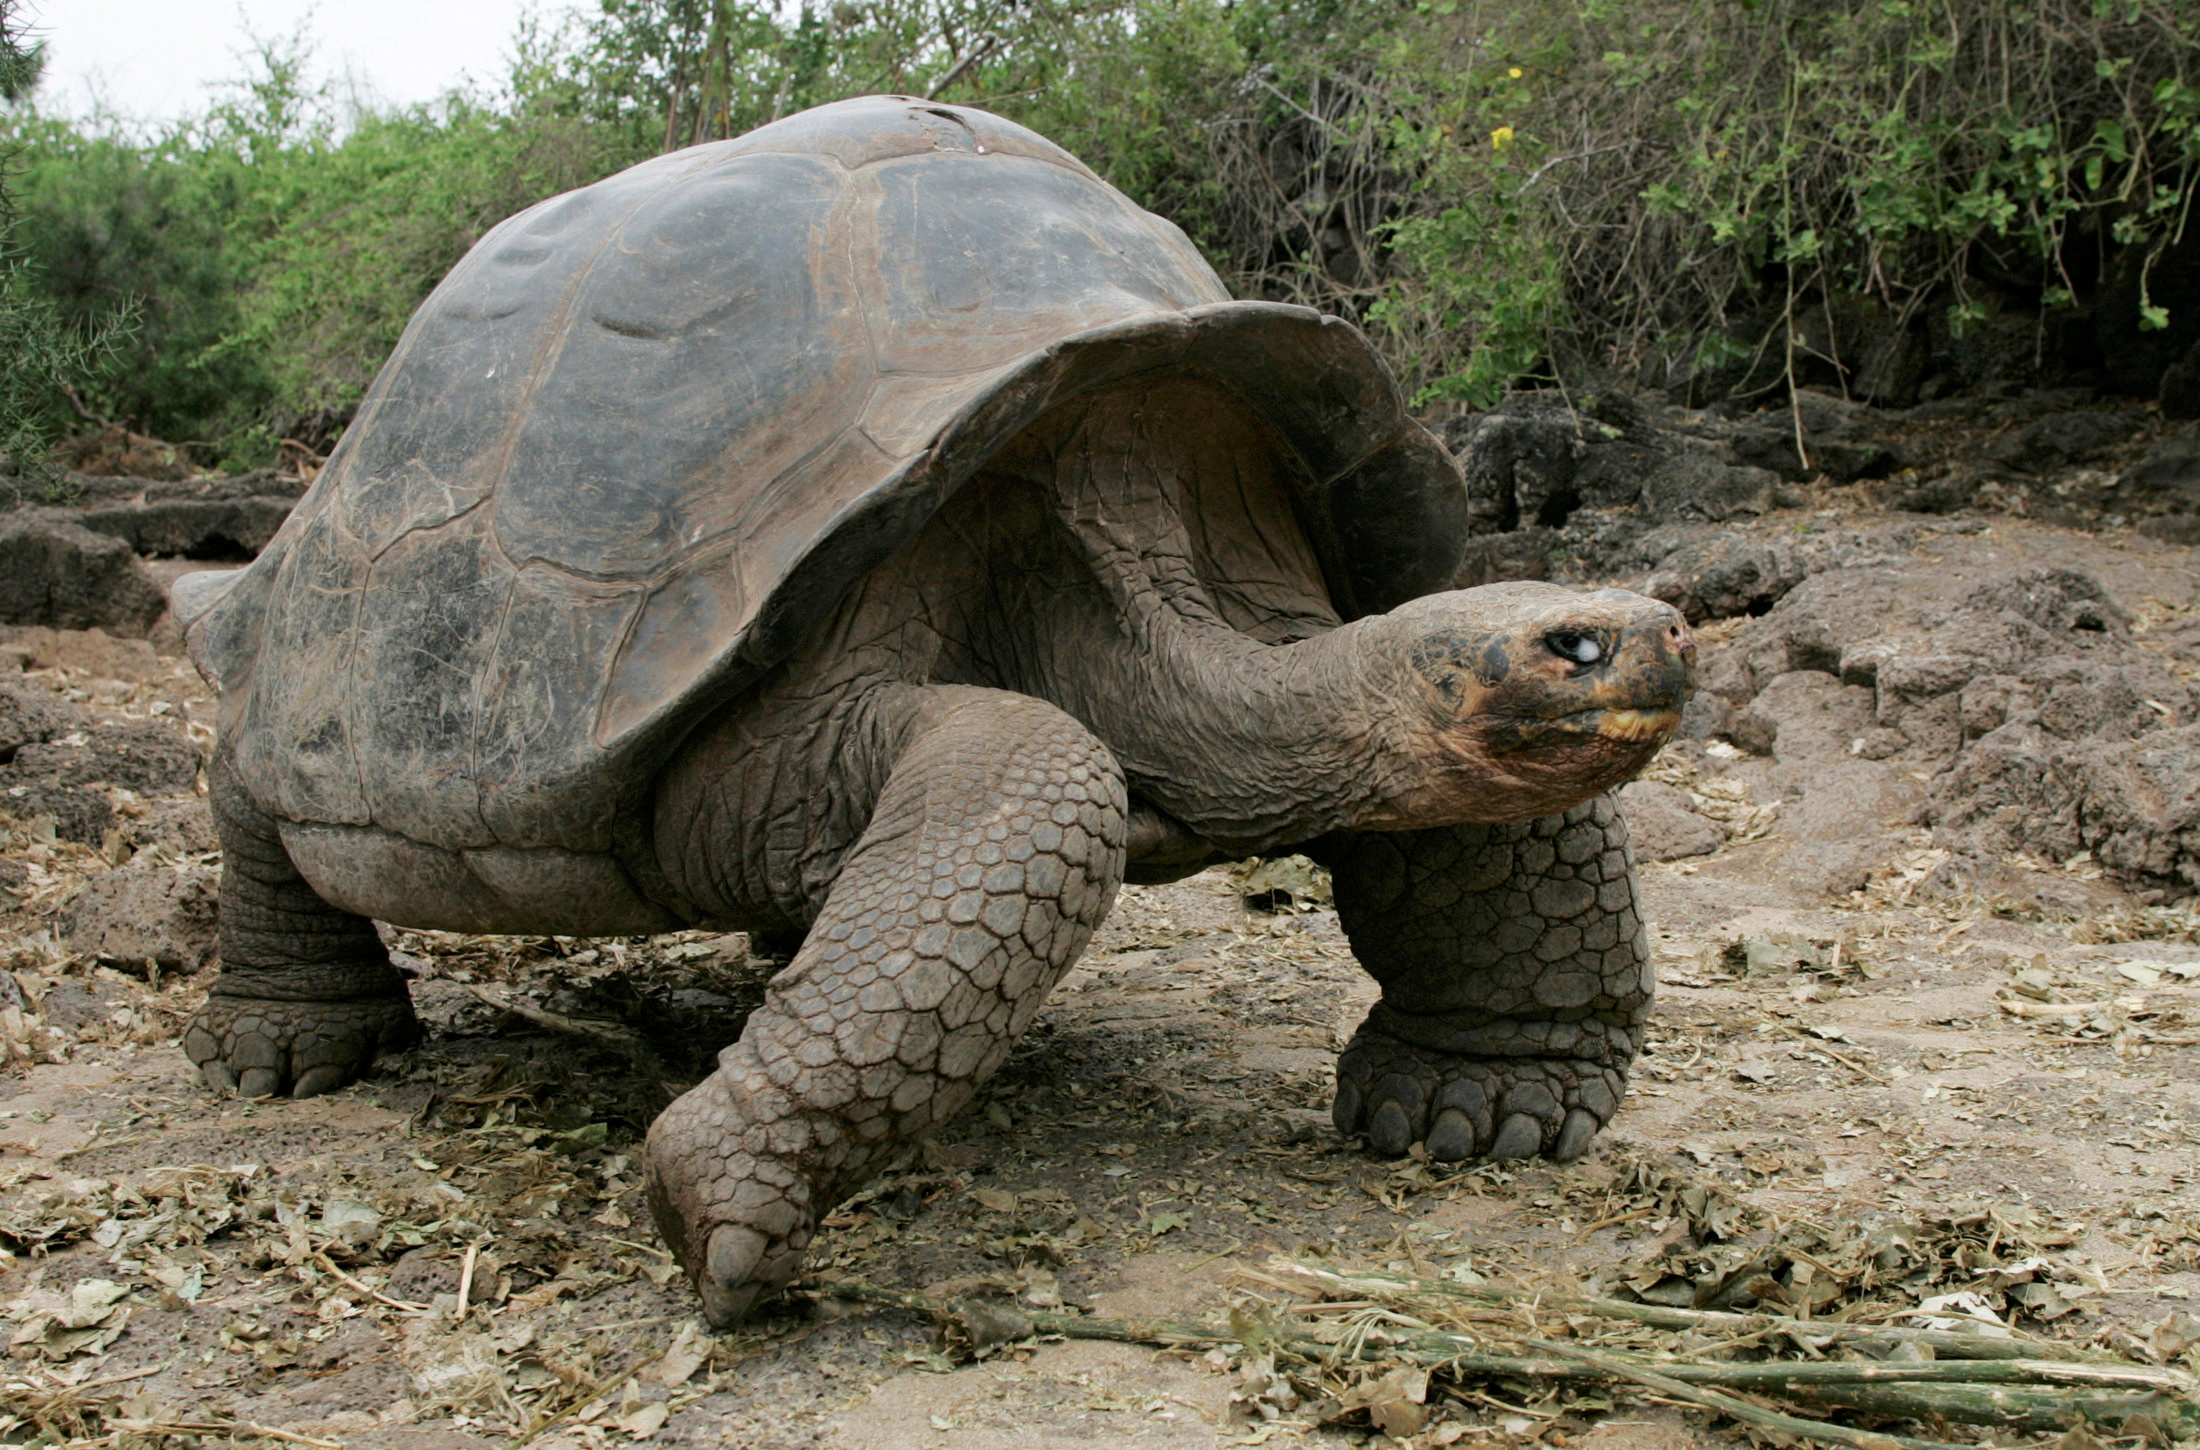 A giant tortoise is seen on the Galapagos islands